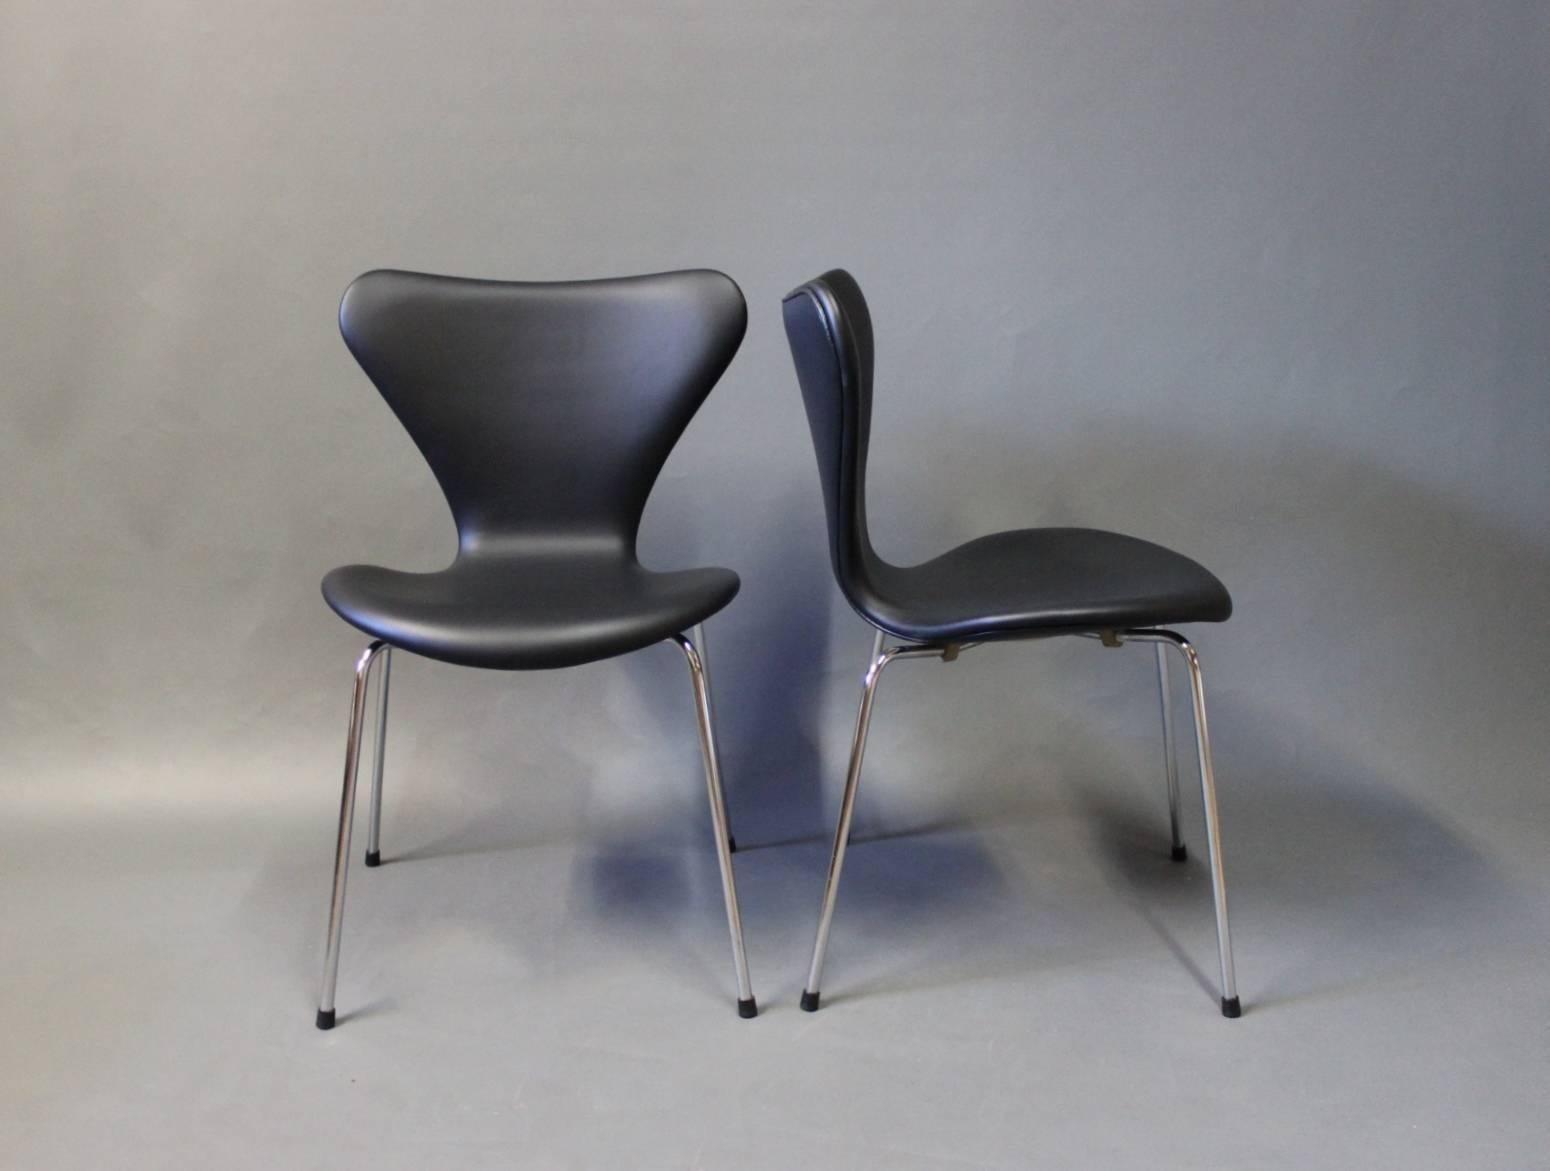 A pair of seven chairs, model 3107, designed by Arne Jacobsen and manufactured by Fritz Hansen in 1967. The chairs have recently been upholstered in Classic black leather.